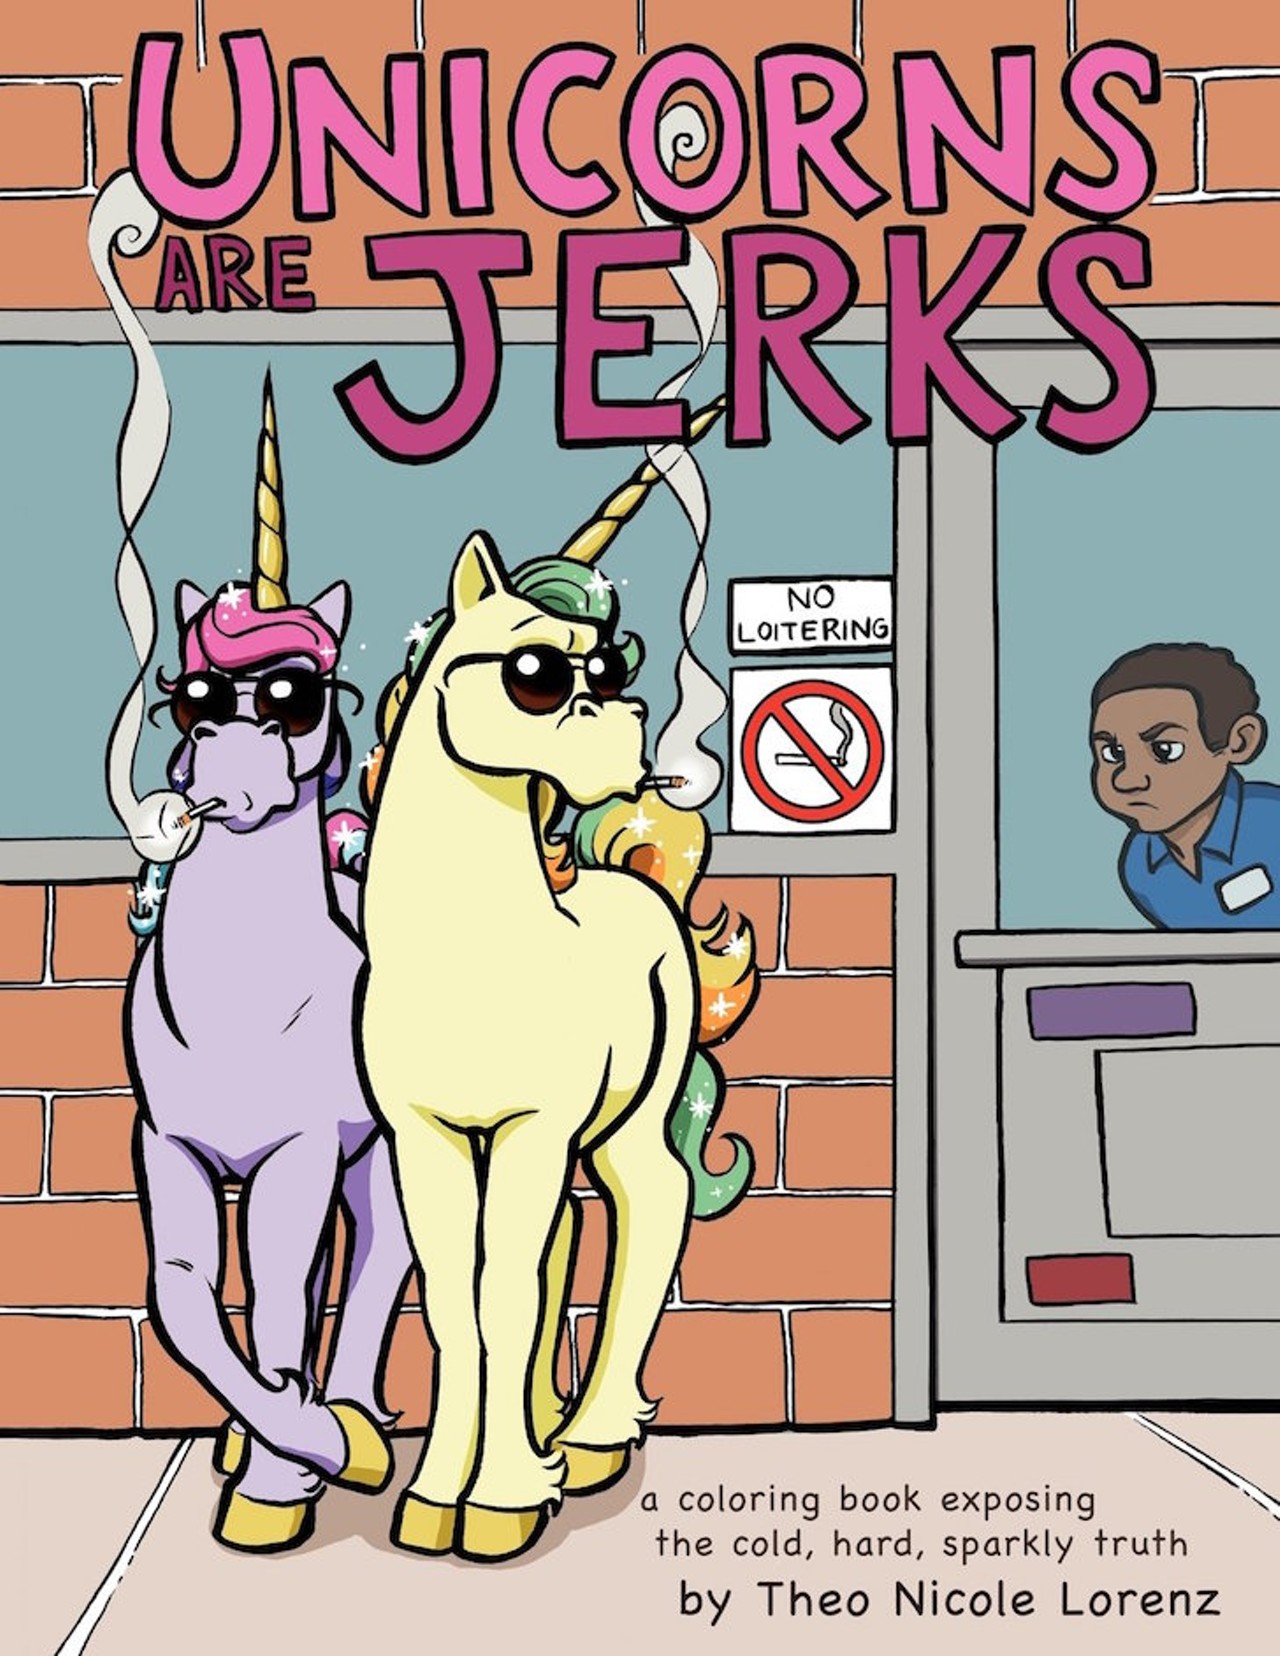  Unicorns Are Jerks: A coloring book exposing the cold, hard, sparkly truth
It's about time someone said it. 
Buy it at amazon.com 